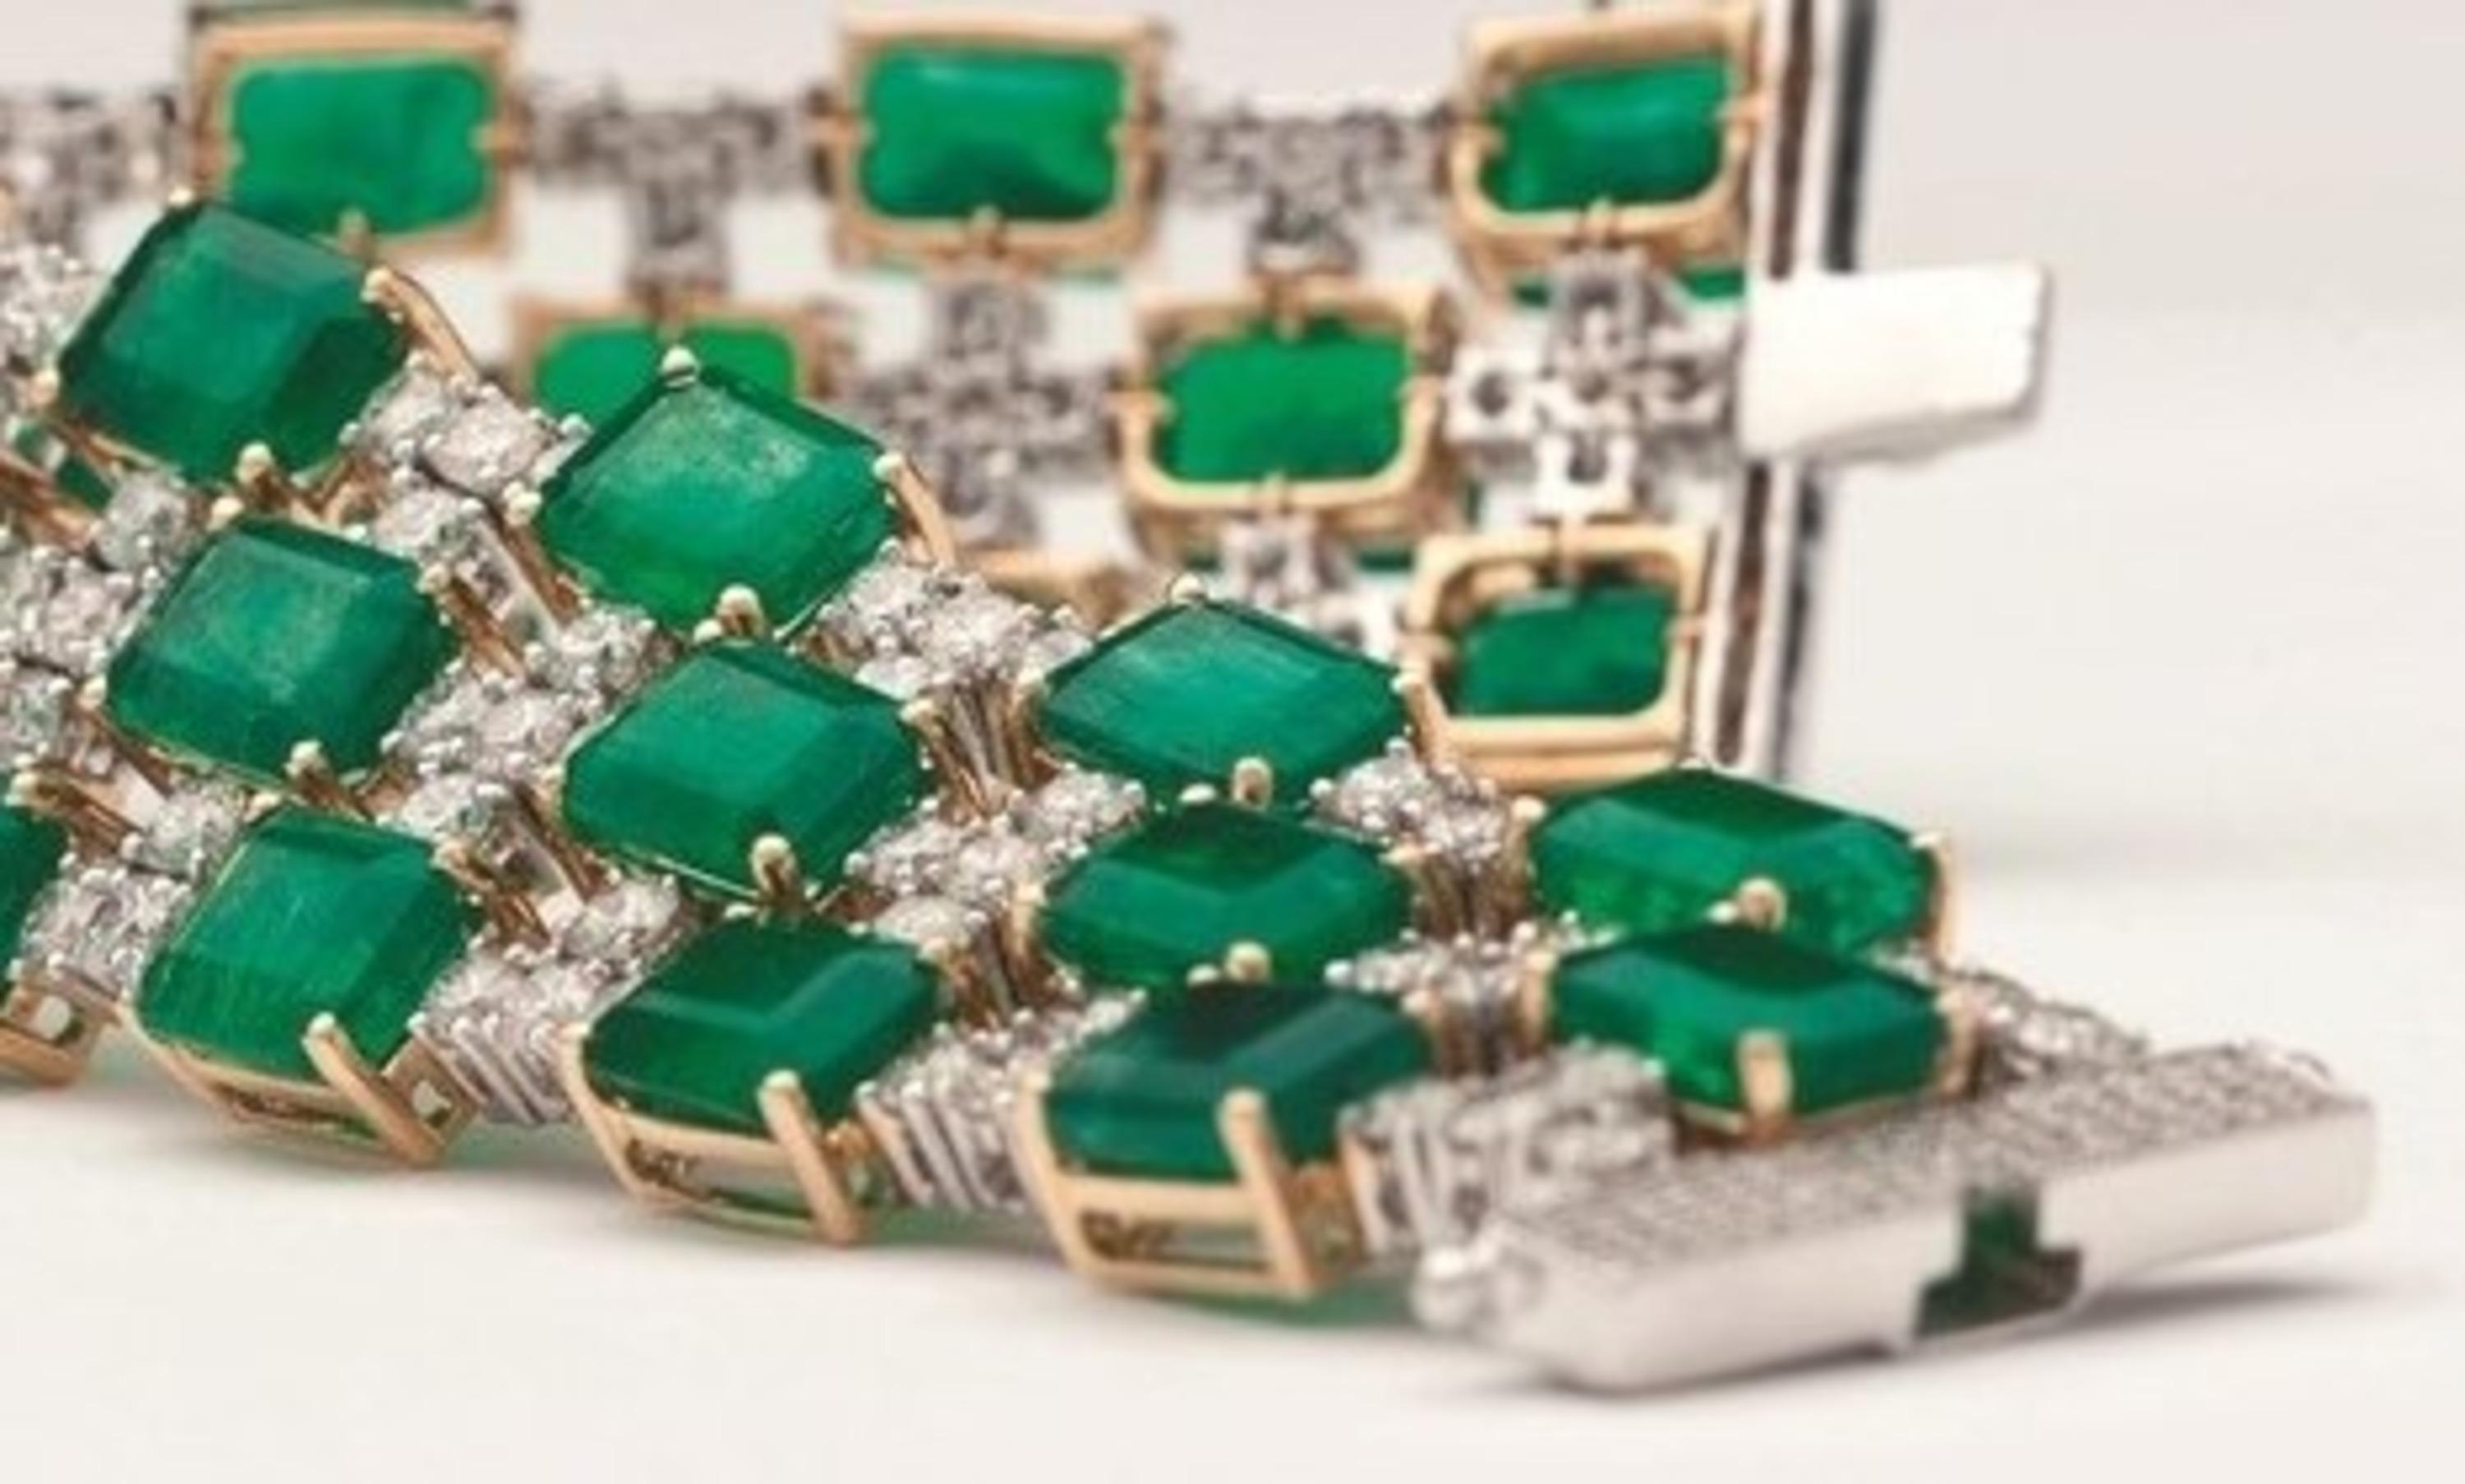 This 18 karat yellow gold rhodium plated lace bracelet stands out on the basis of an exceptional suite of calibrated Zambian emeralds with brilliant cut diamonds.Octagonal emerald cut emeralds and brilliant cut round diamonds seem a harmonious blend